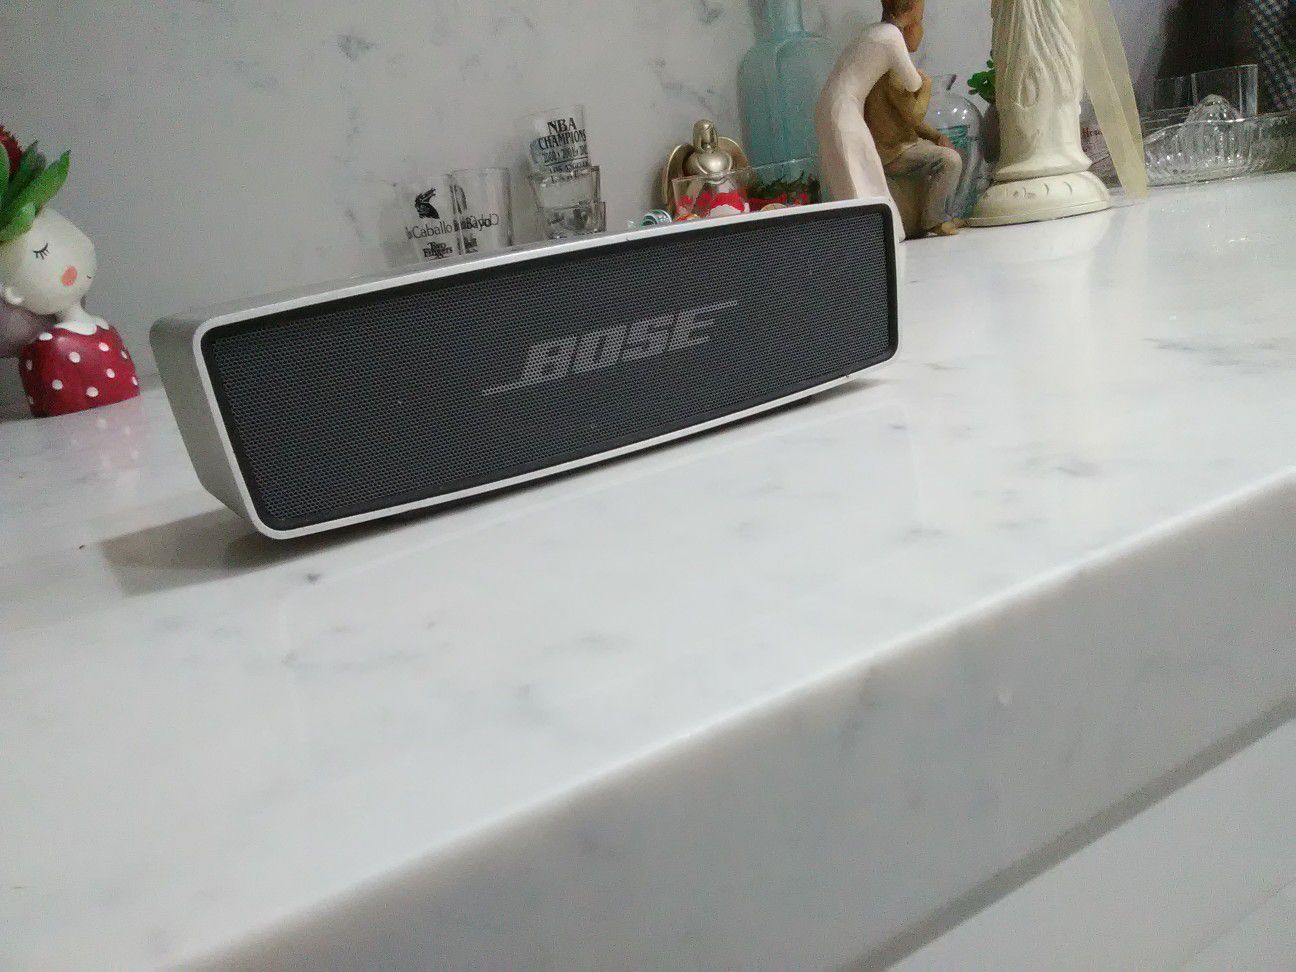 Bose SoundLink mini new sounds amazing absolutely nothing wrong except it has no charger but this little baby is awesome